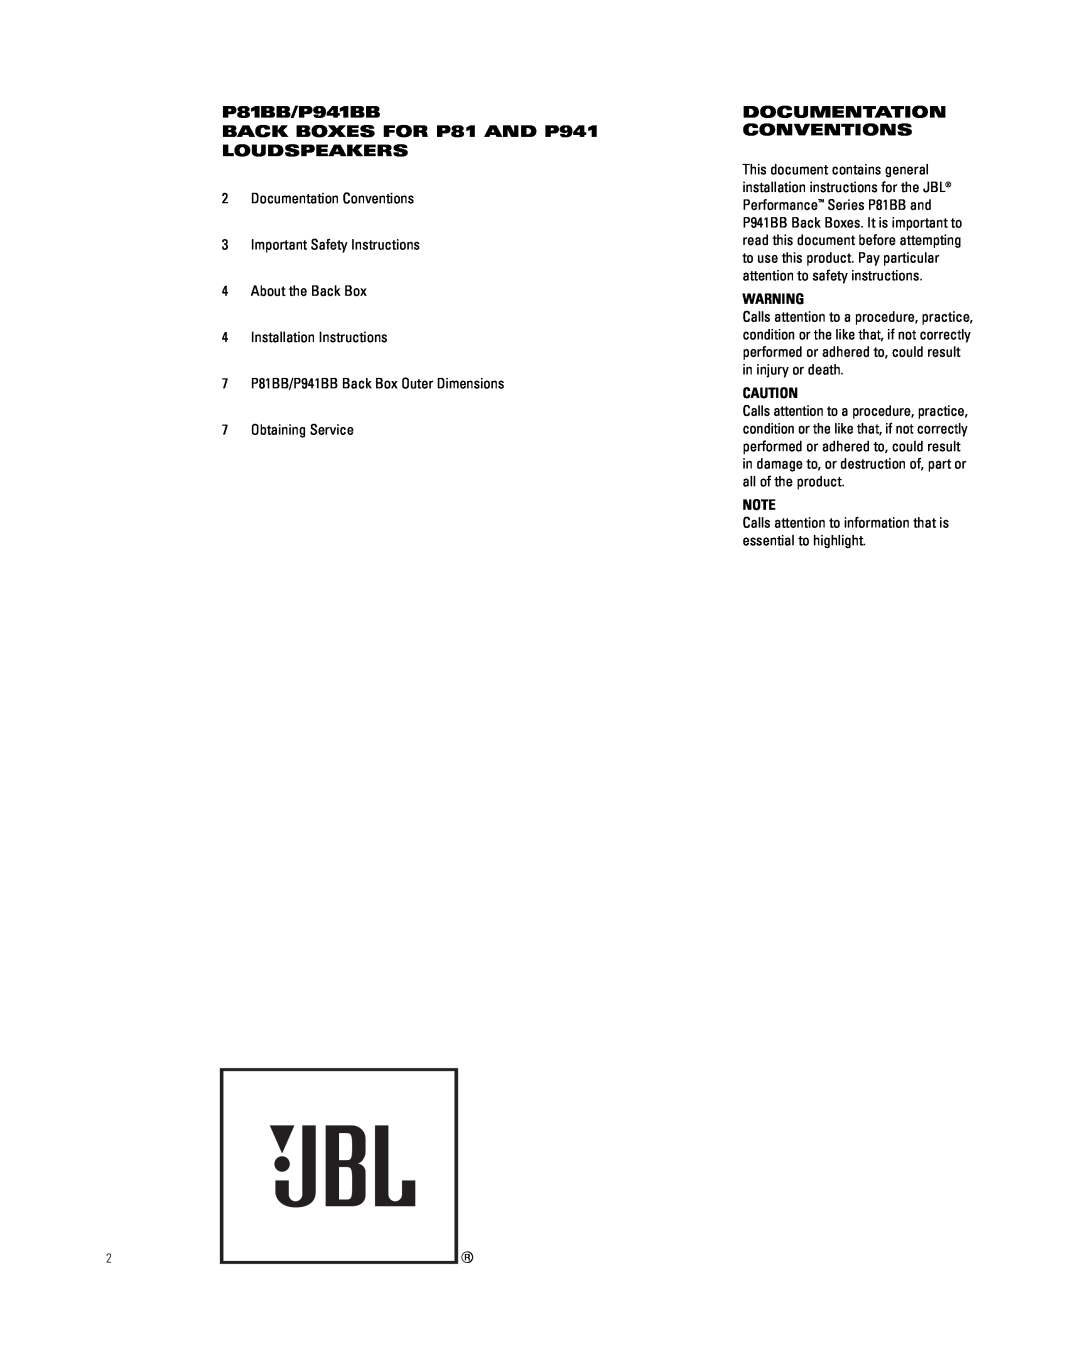 JBL installation instructions P81BB/P941BB, BACK BOXES FOR P81 AND P941 LOUDSPEAKERS, Documentation Conventions 